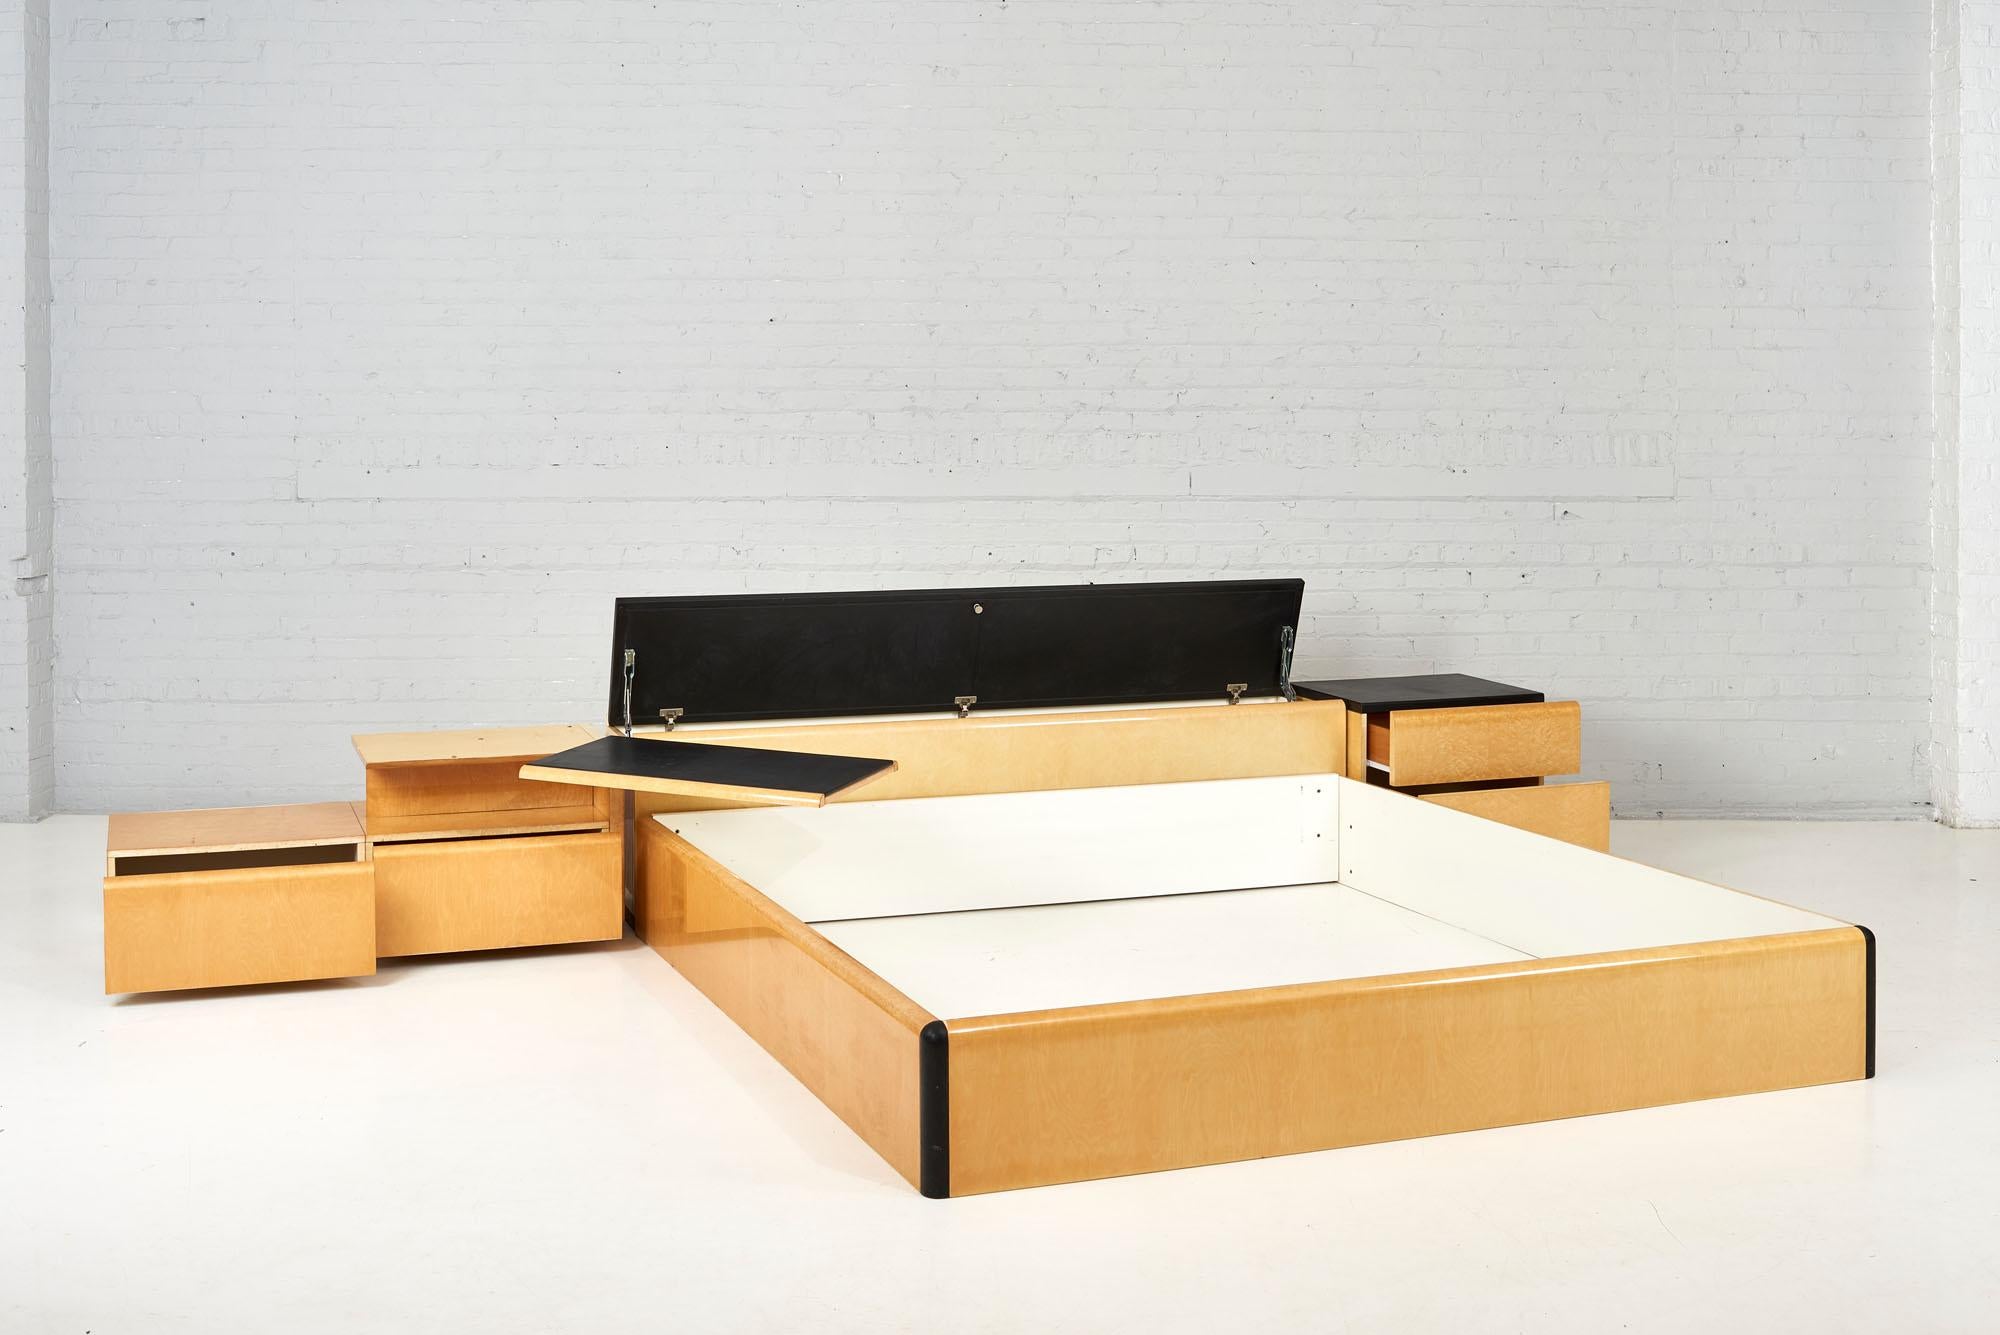 Late 20th Century Pace Collection Bed with Night Stands, Brown Leather Birdseye Maple, 1970